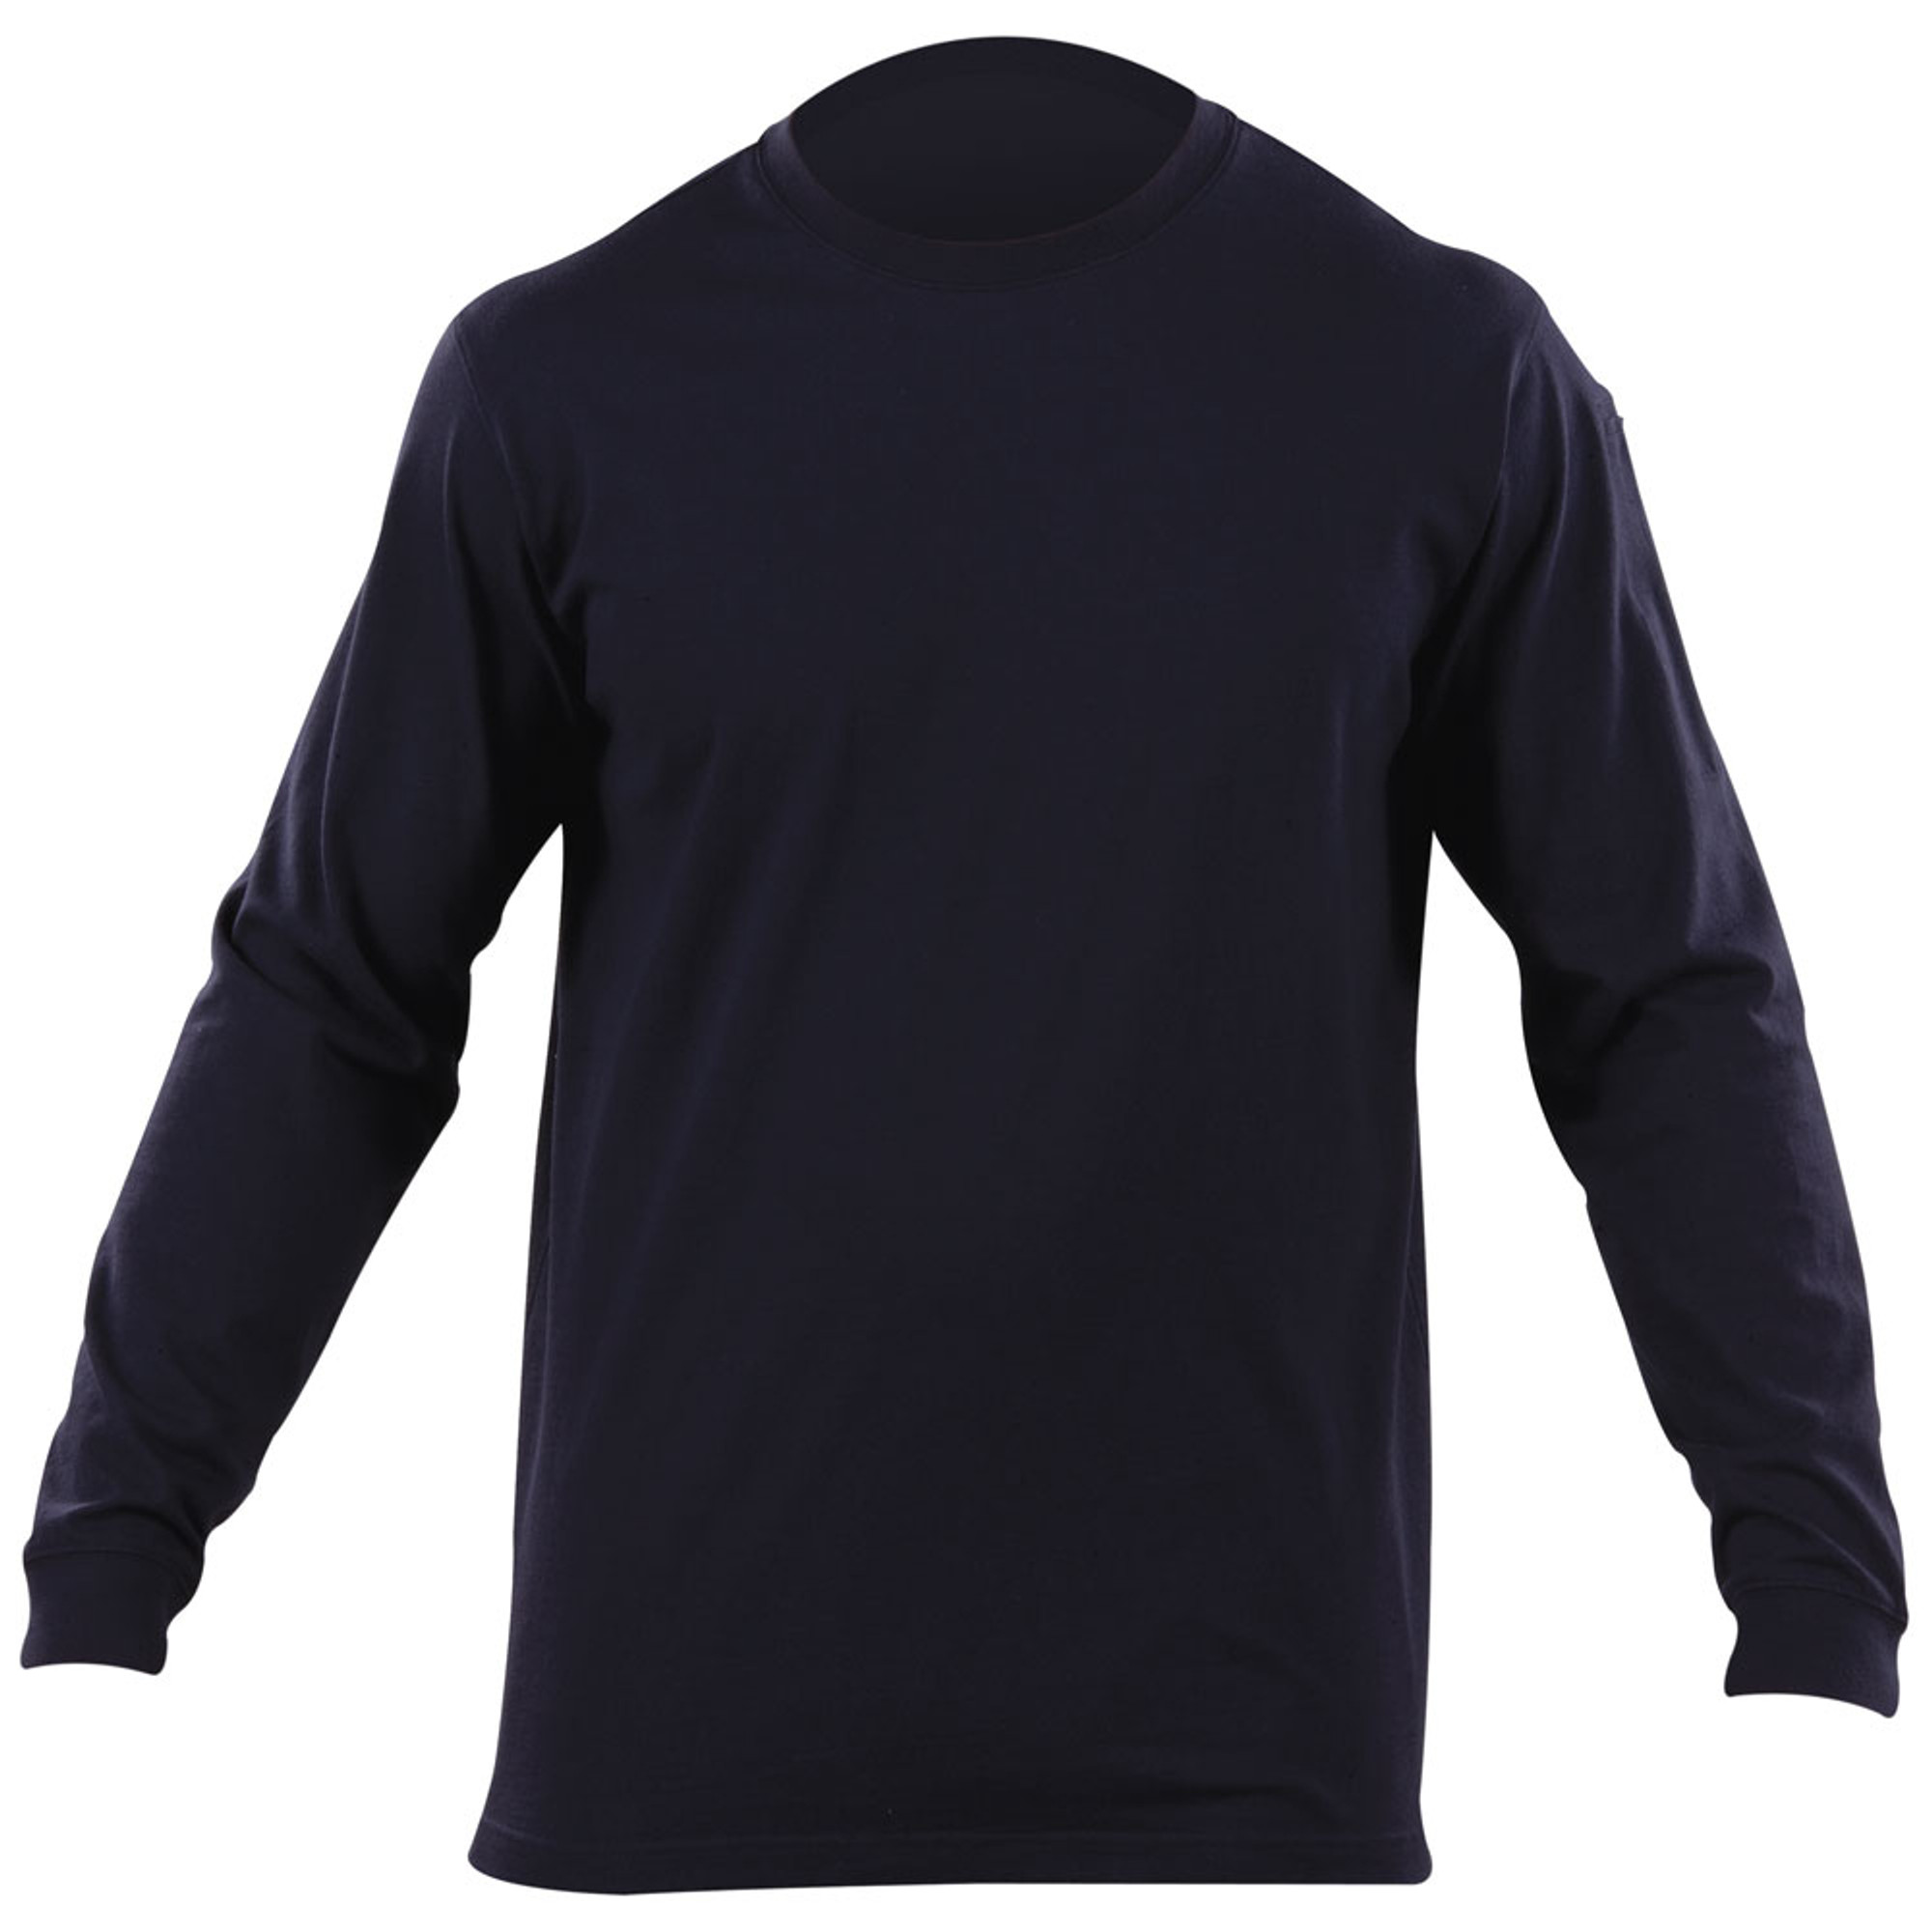 5.11 Professional Long Sleeve T - Fire Navy